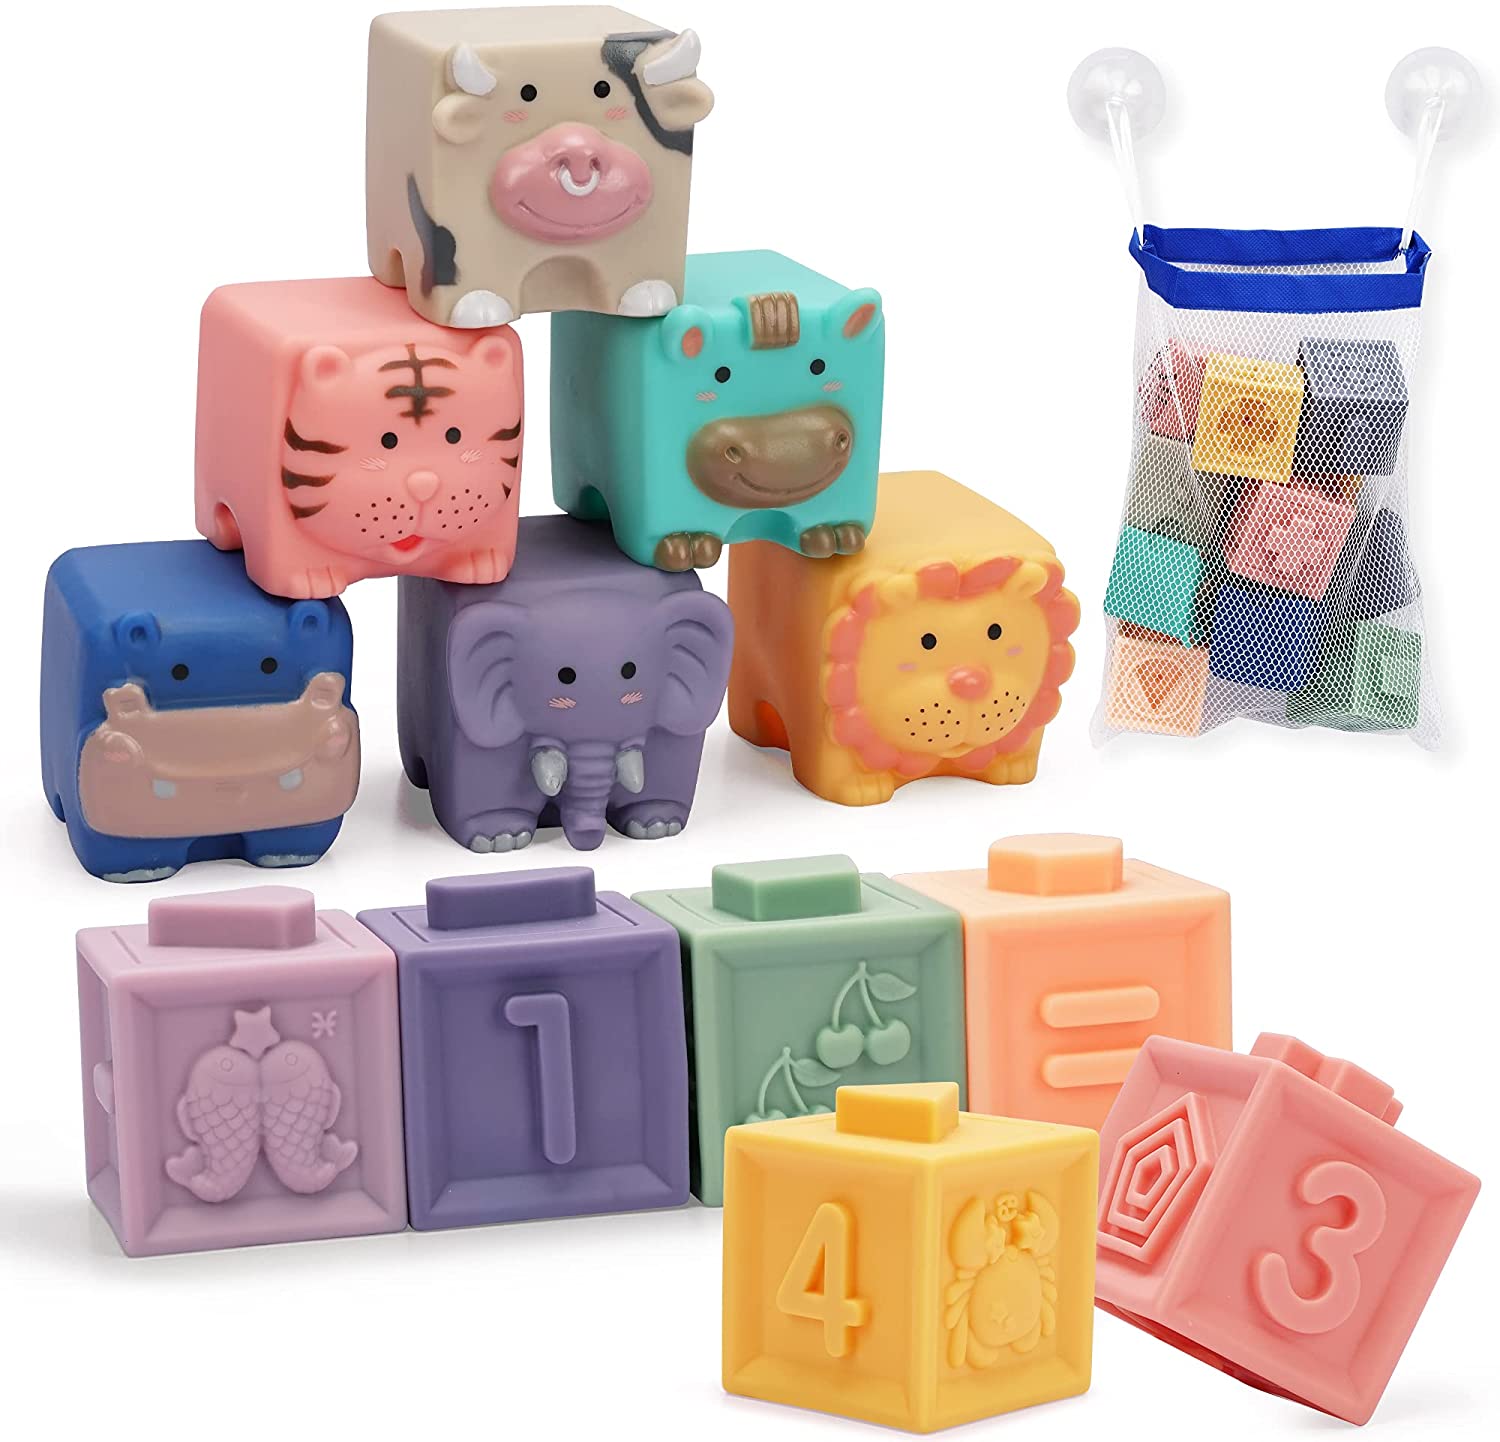 Soft Baby Blocks 6 to 12 Months and Up Animal Squeeze Block Set 12Pcs Infant Stacking Cup Sensory baby stacking toys Babies Bath Toy Building Blocks for Boys& Girls Teething Toy Play Activity Gym 